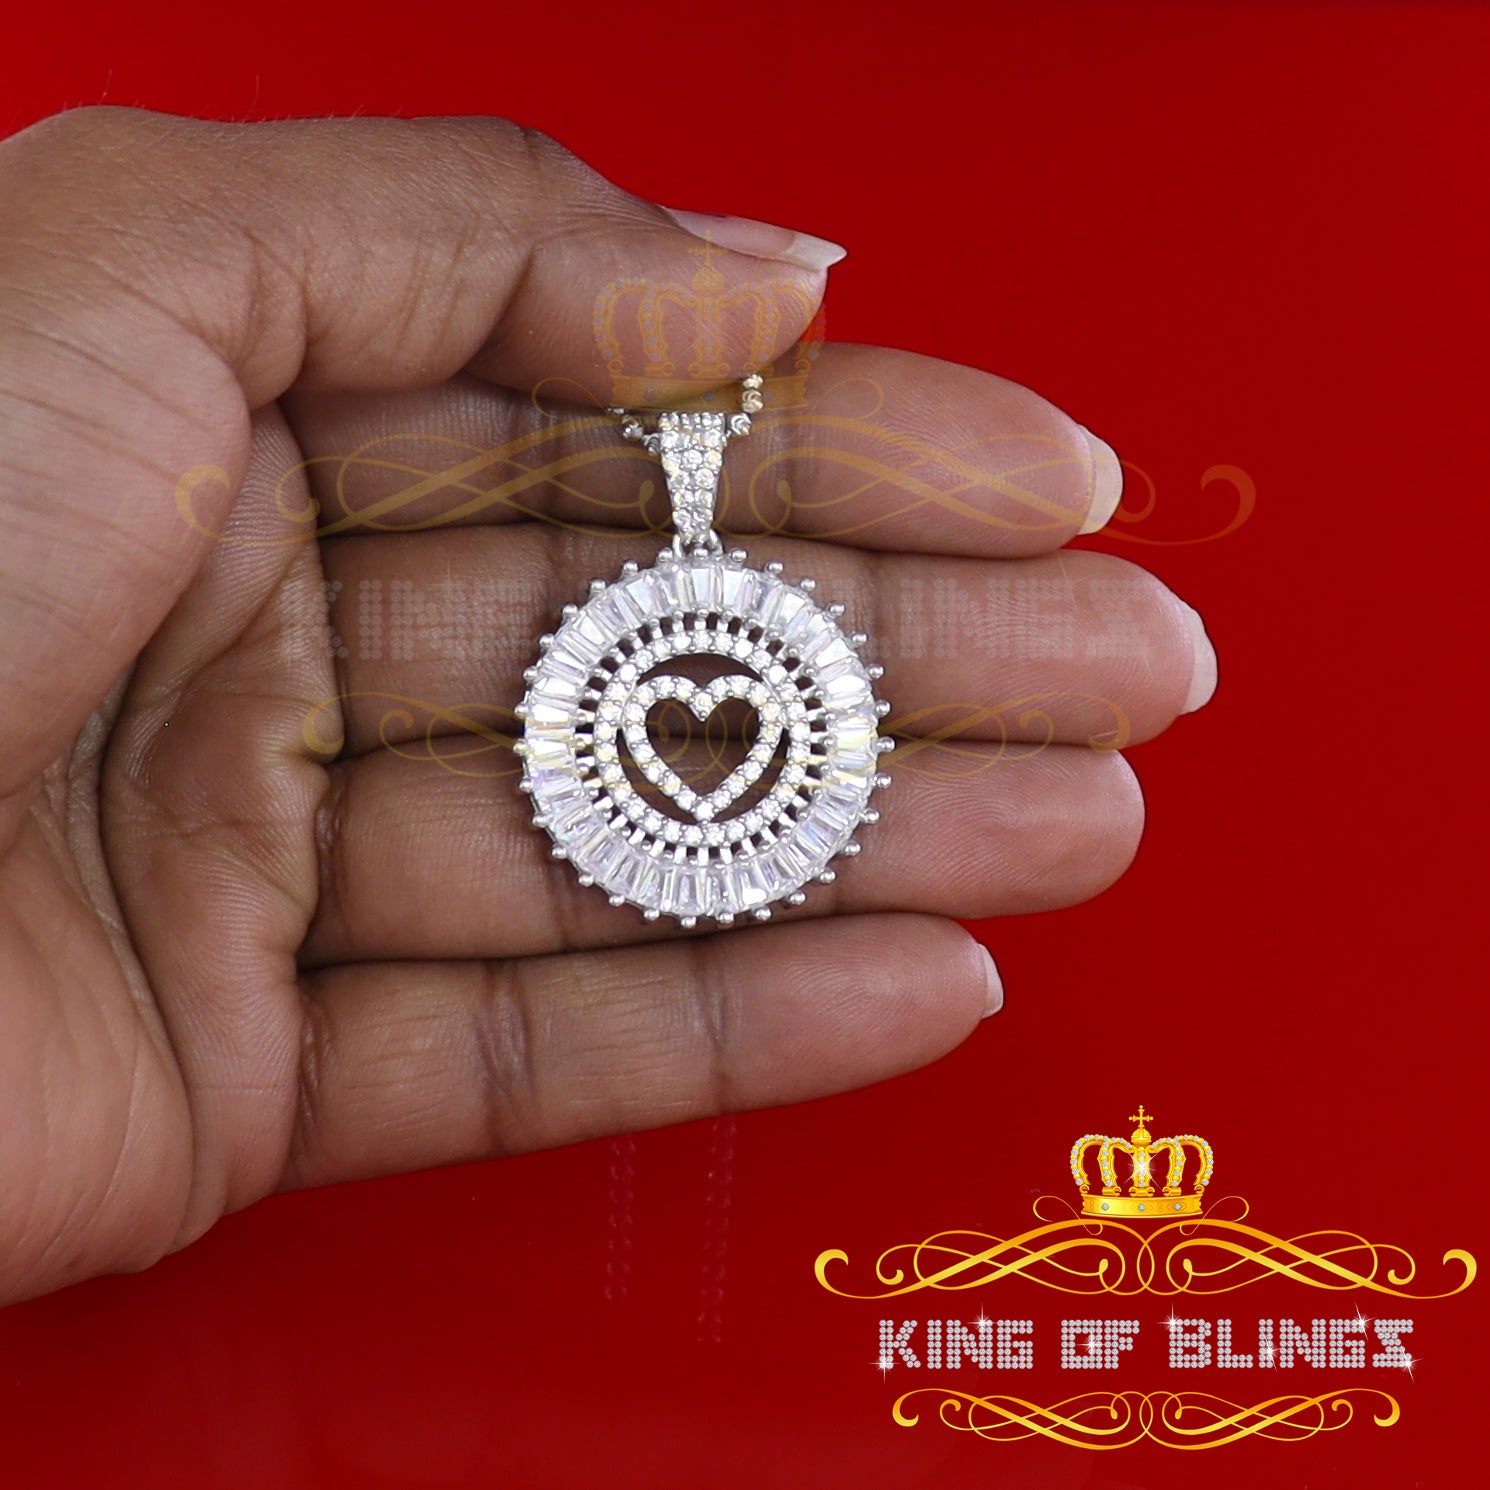 King Of Bling's Beautiful White Sterling Silver Heart Shape Pendant with 3.96ct Cubic Zirconia KING OF BLINGS